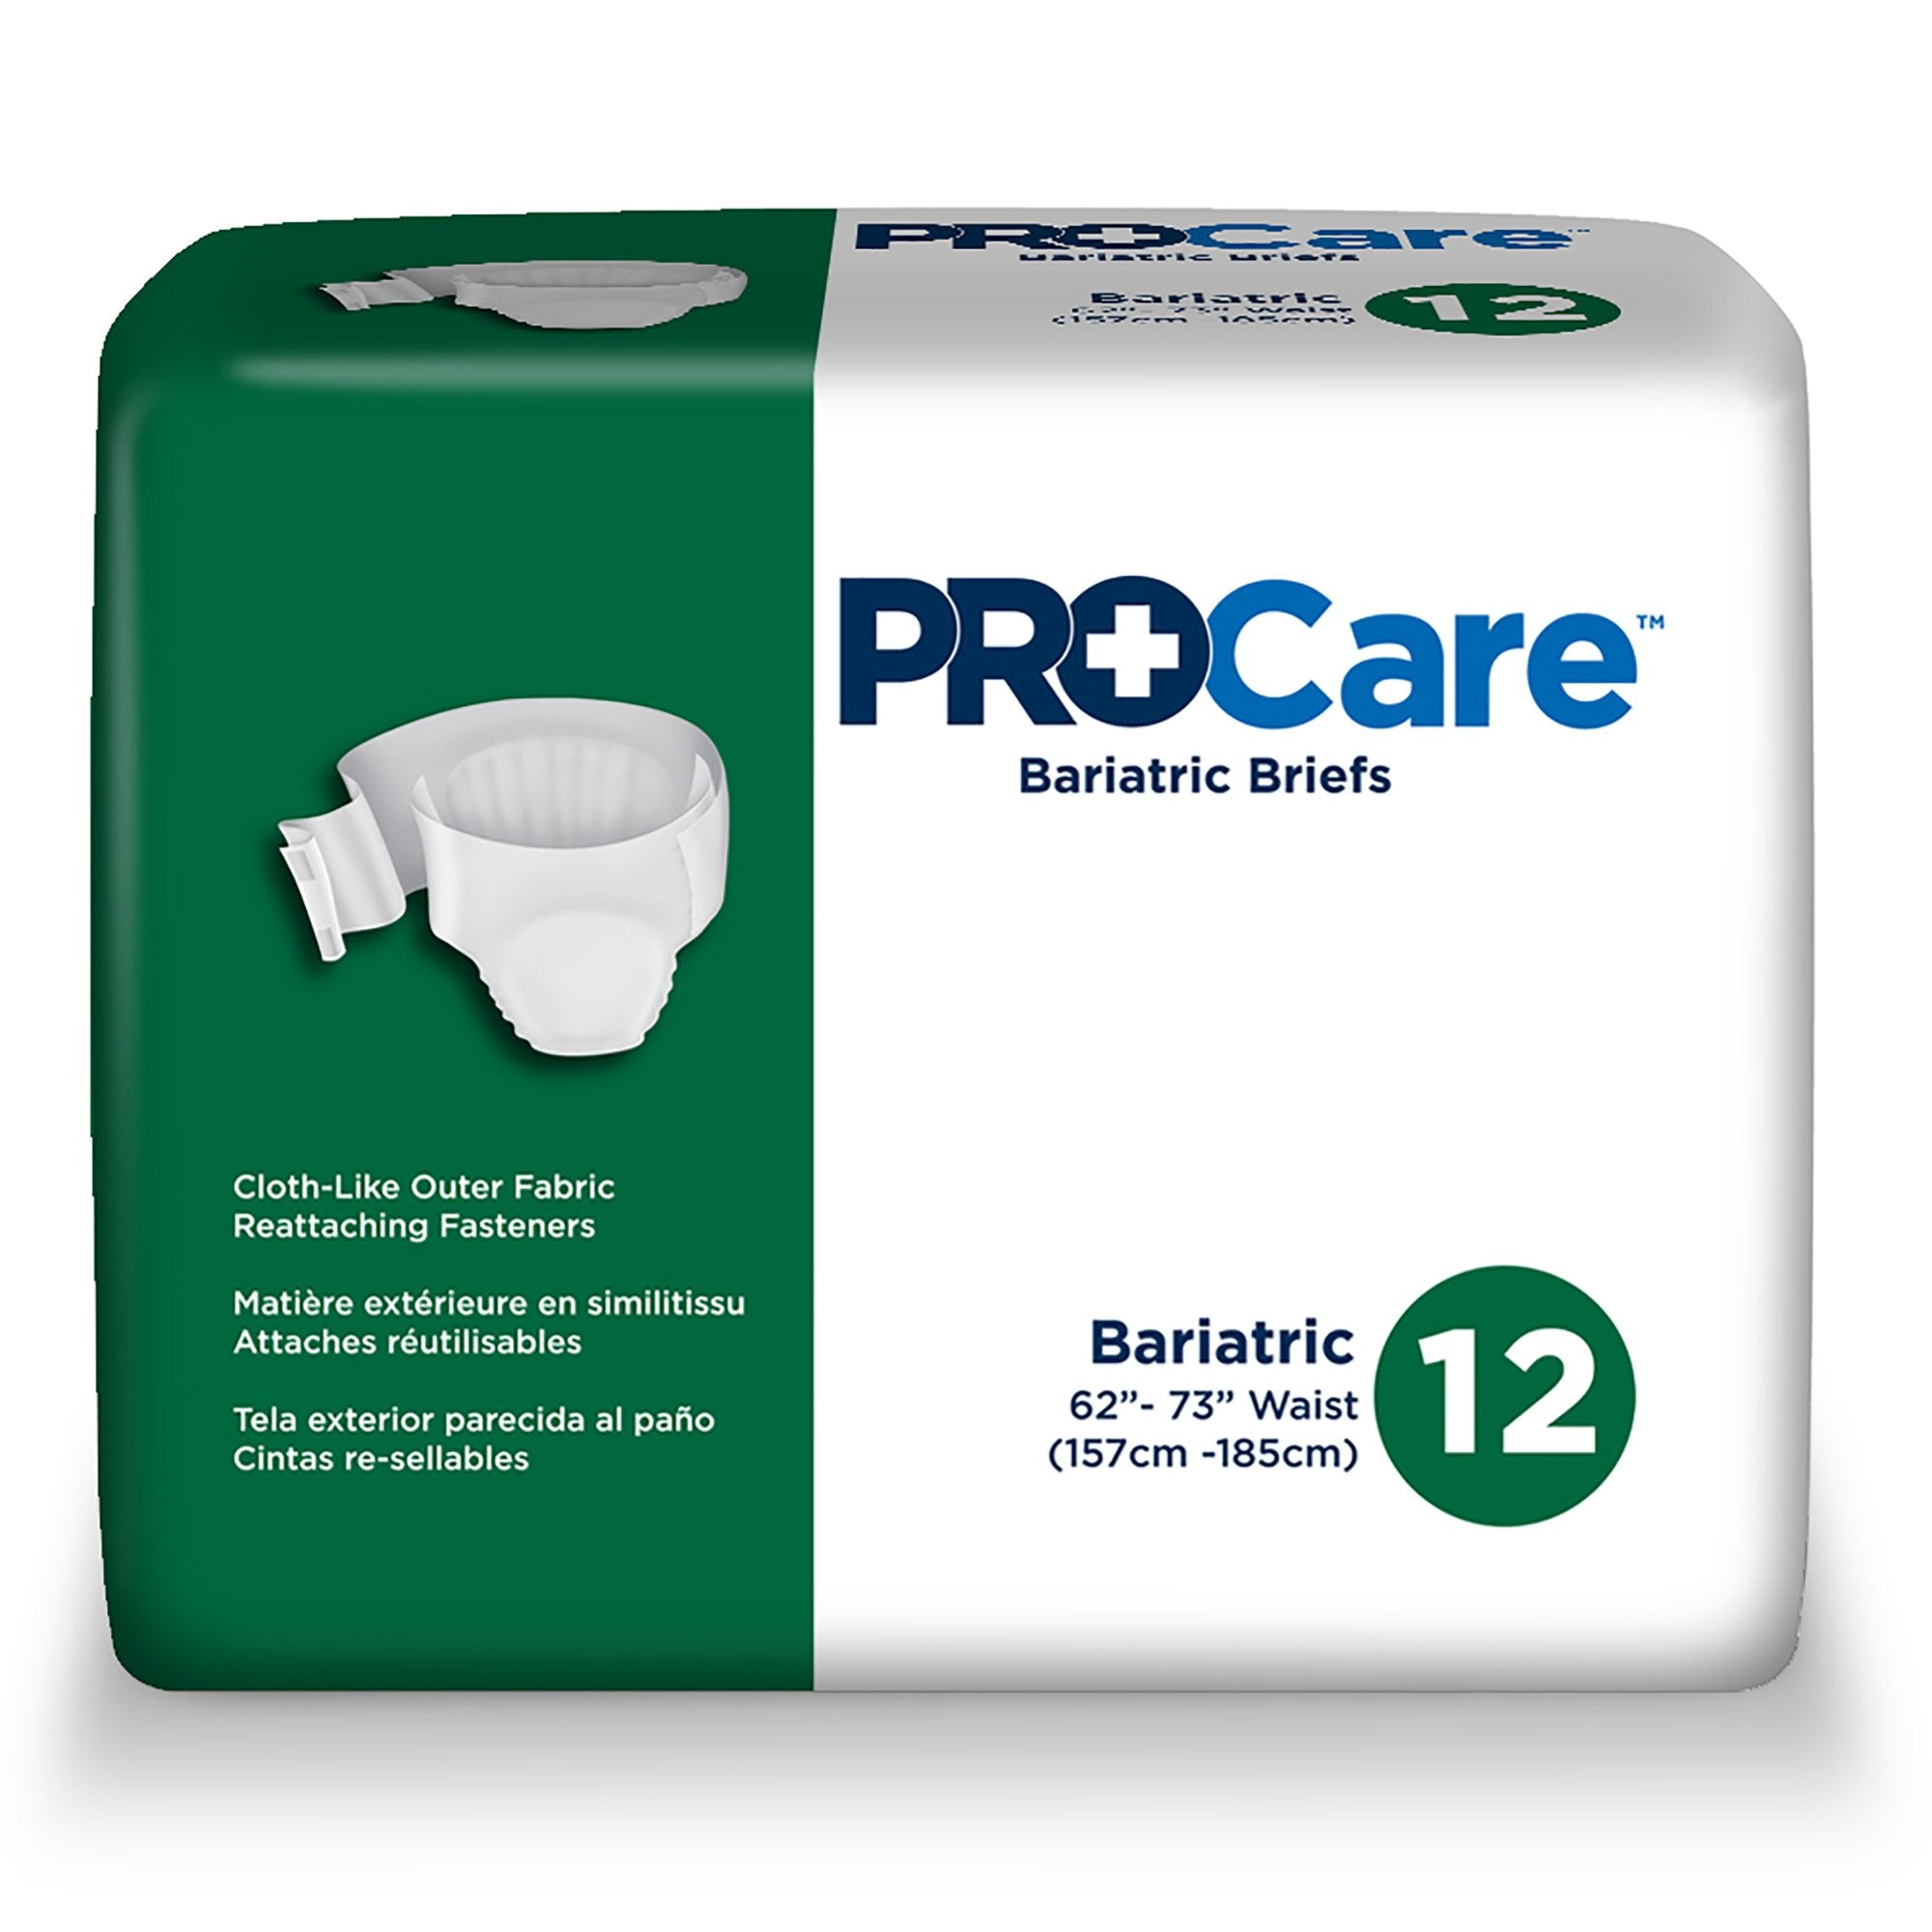 ProCare Unisex Adult Incontinence Brief, Heavy Absorbency, White